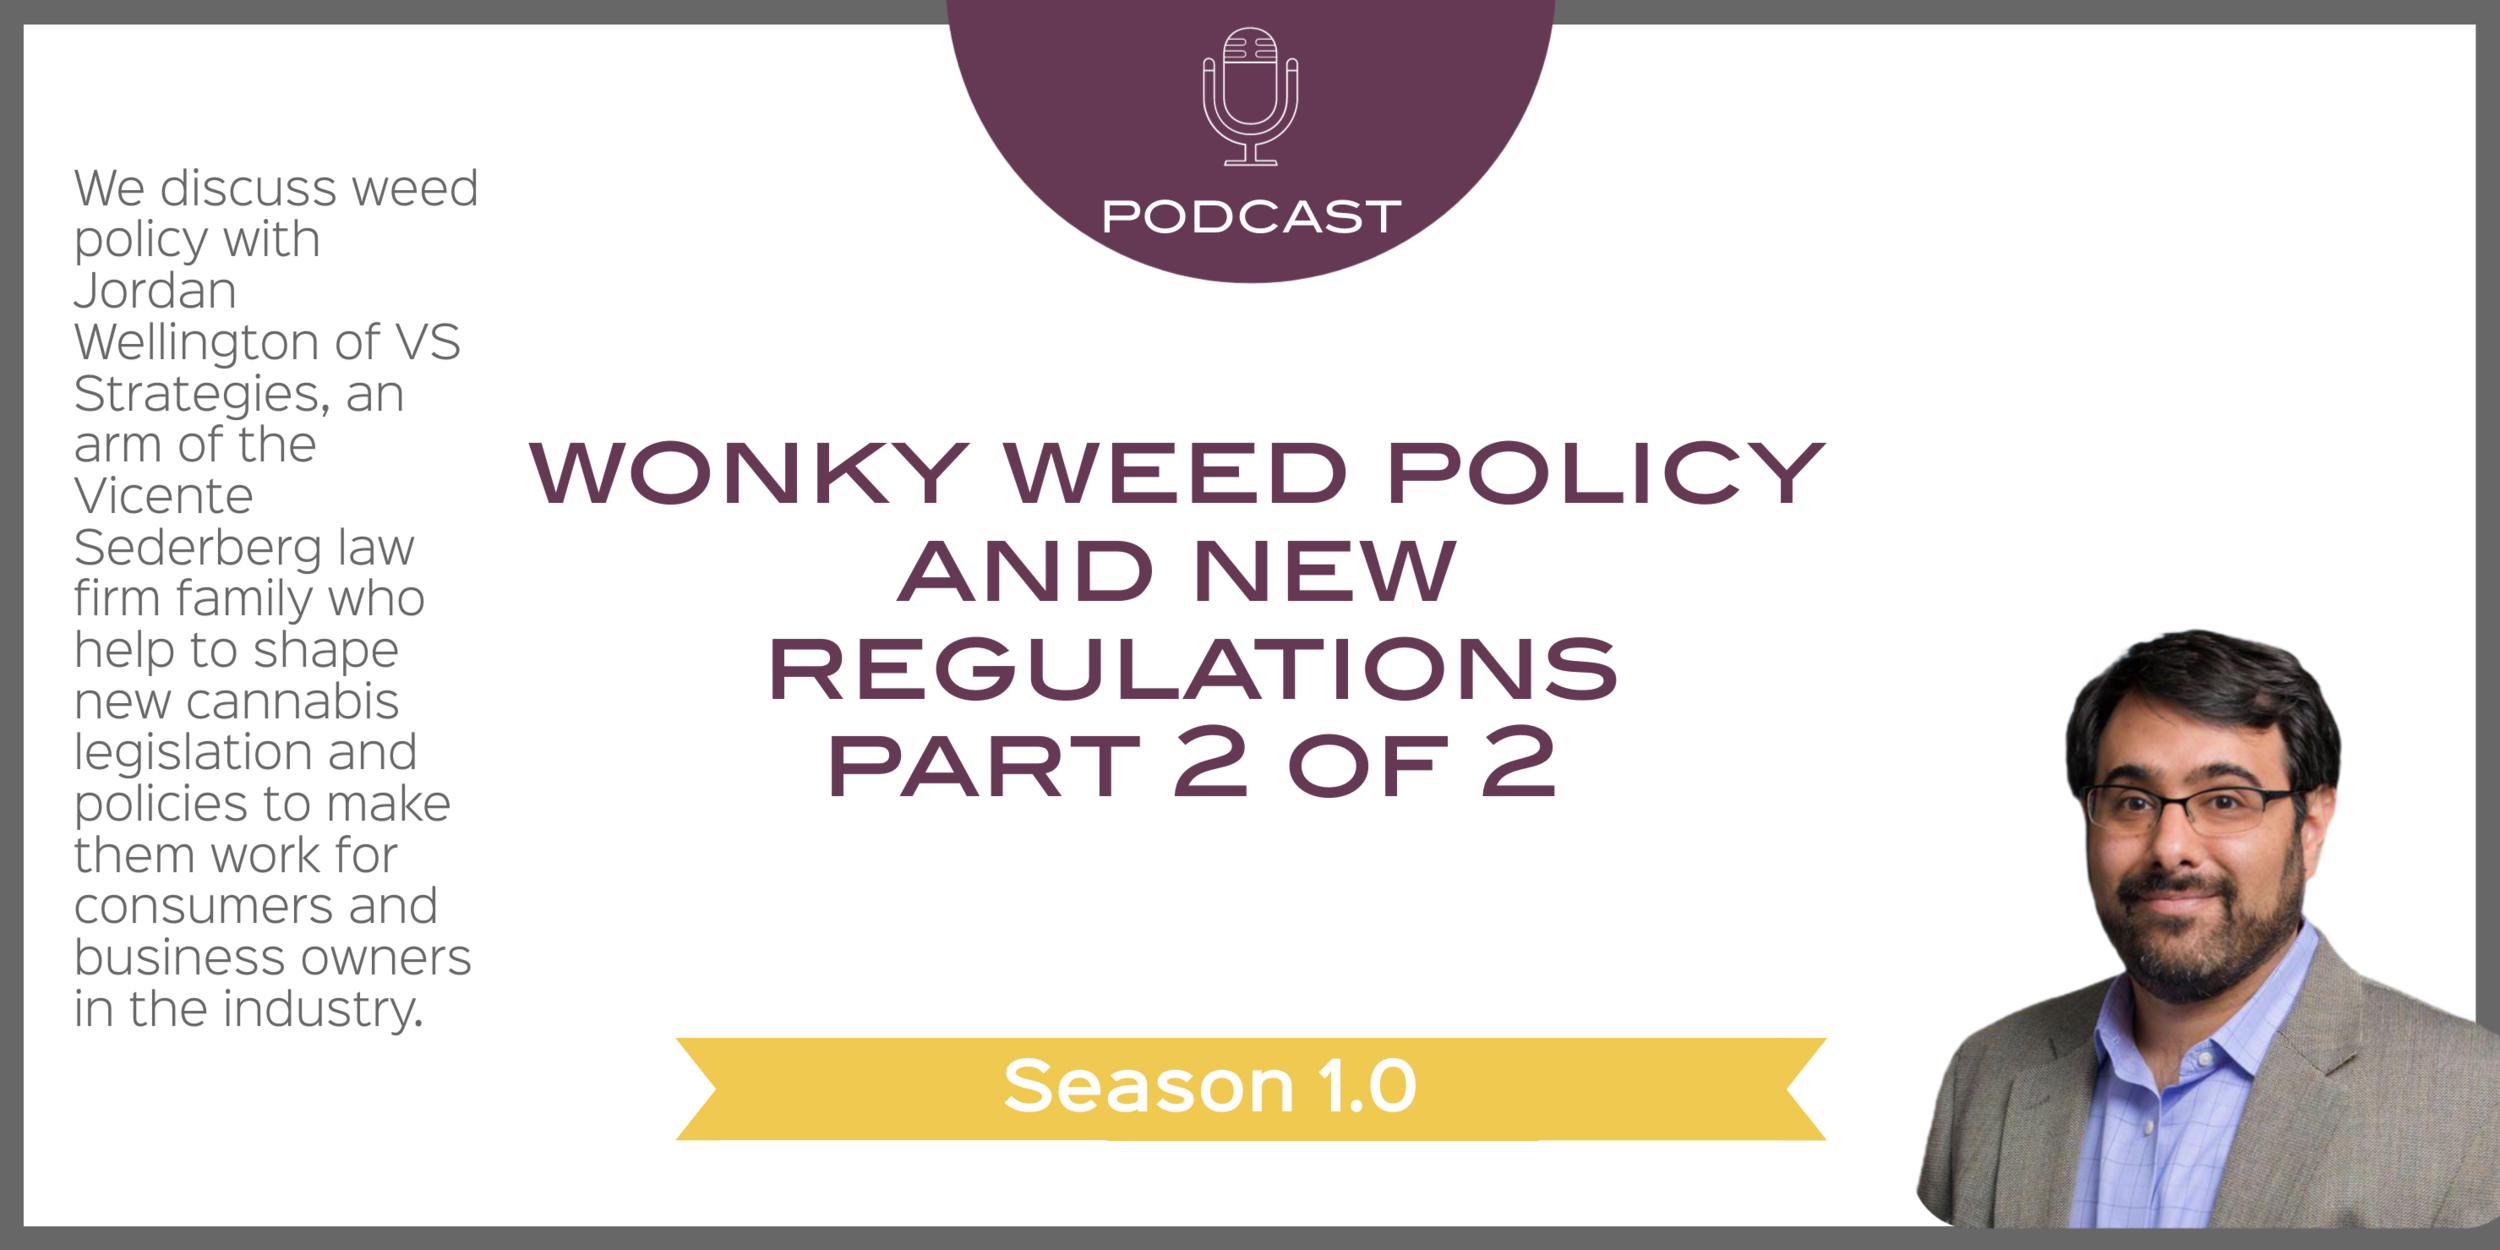 News Updates and Wonky Weed Policy Part 2 with Jordan Wellington